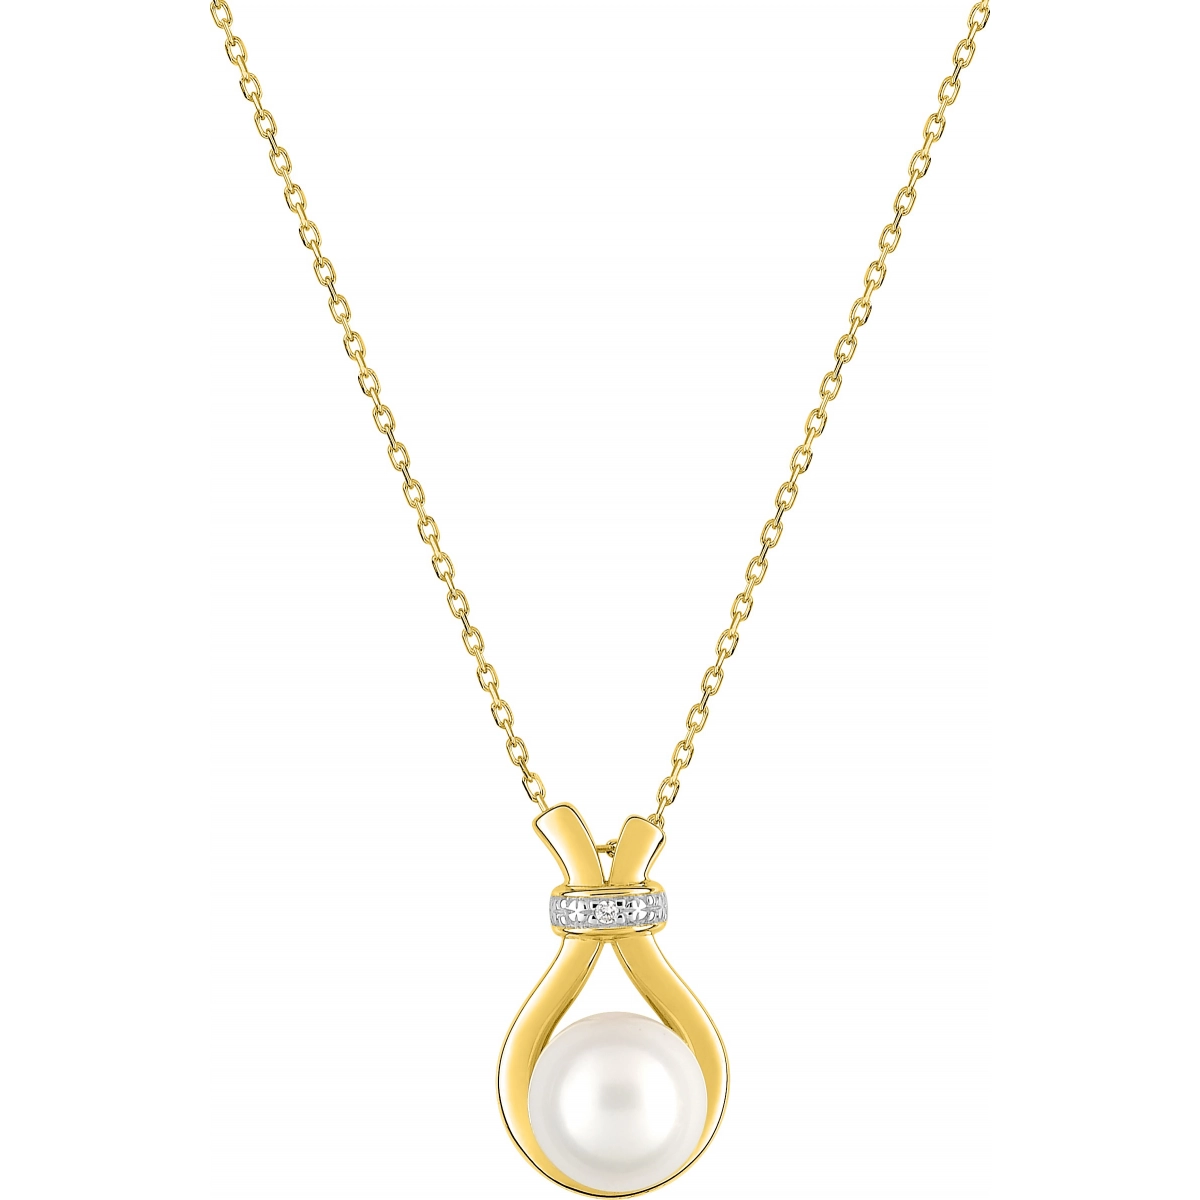 Necklace w. cult. FW pearl and cz 9K YG  Lua Blanca  397043.P3.0